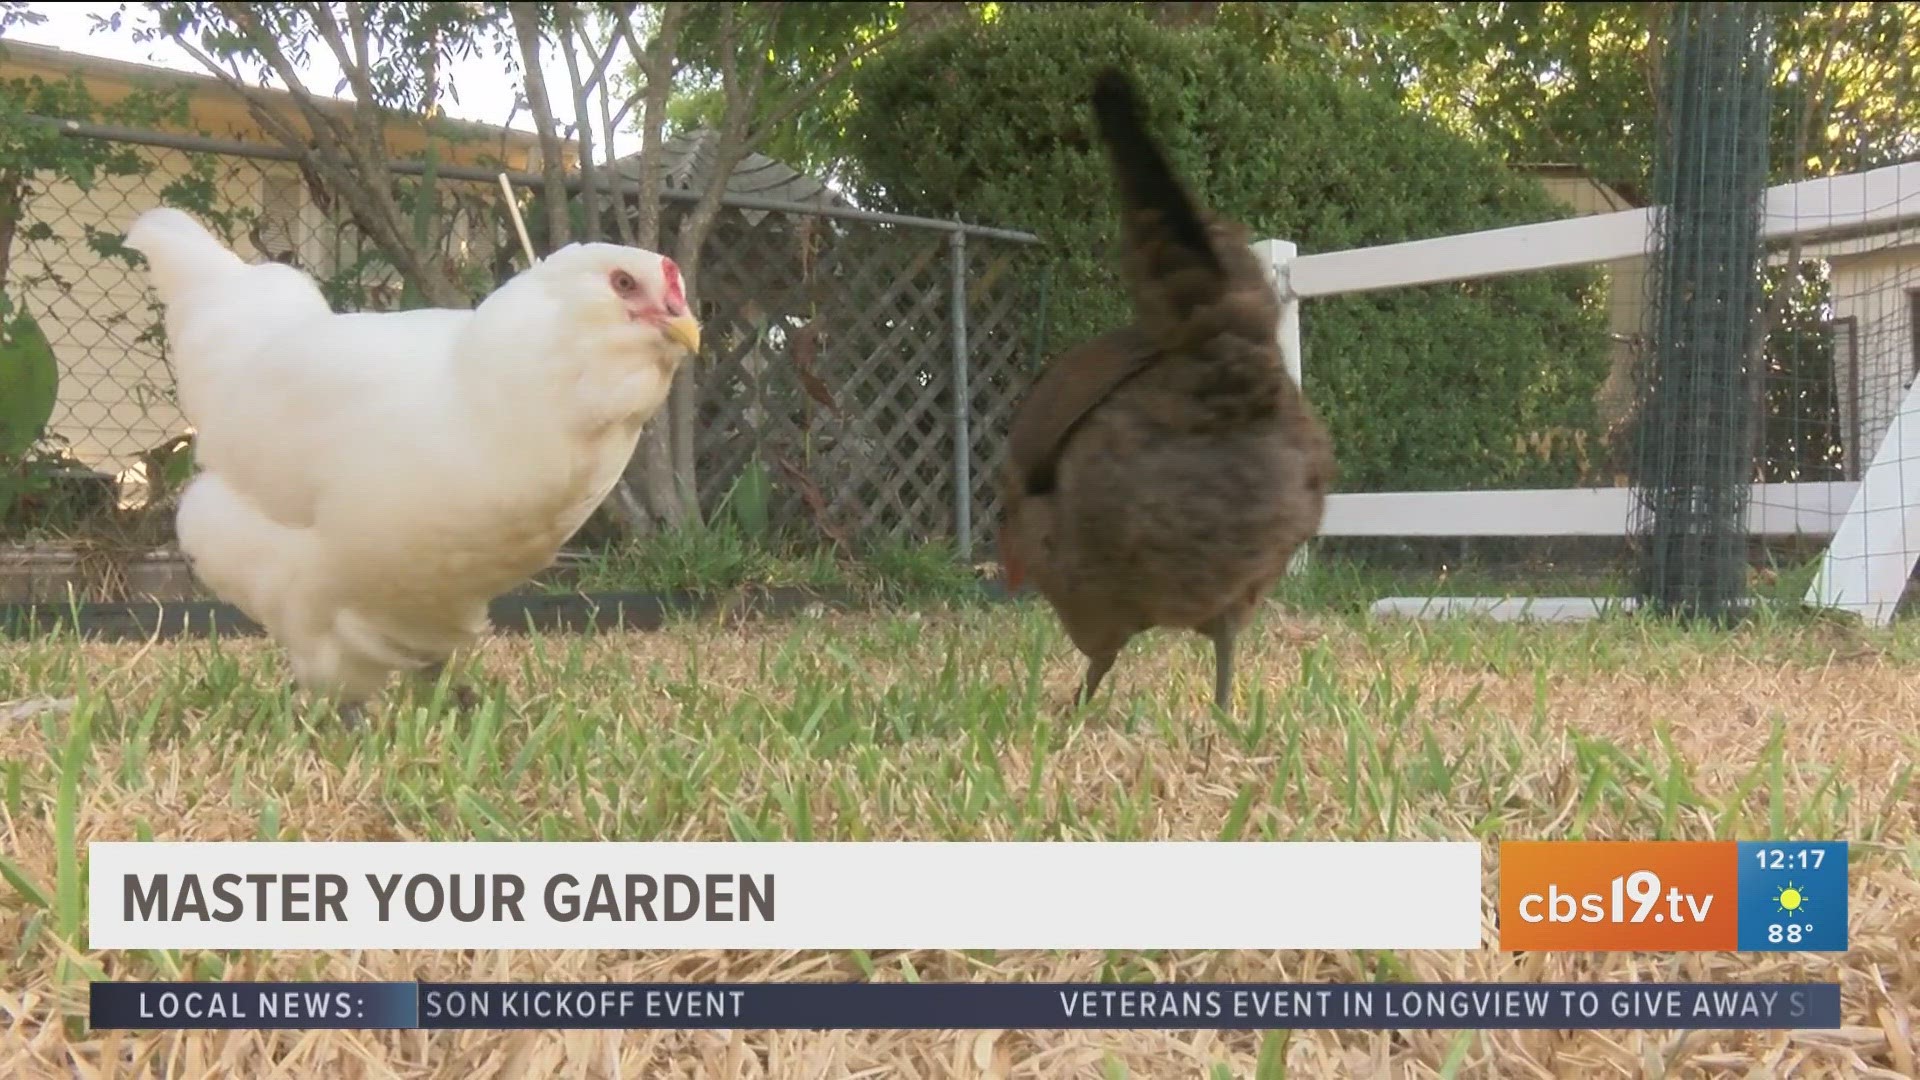 Chickens are great for getting weeds out of your garden!